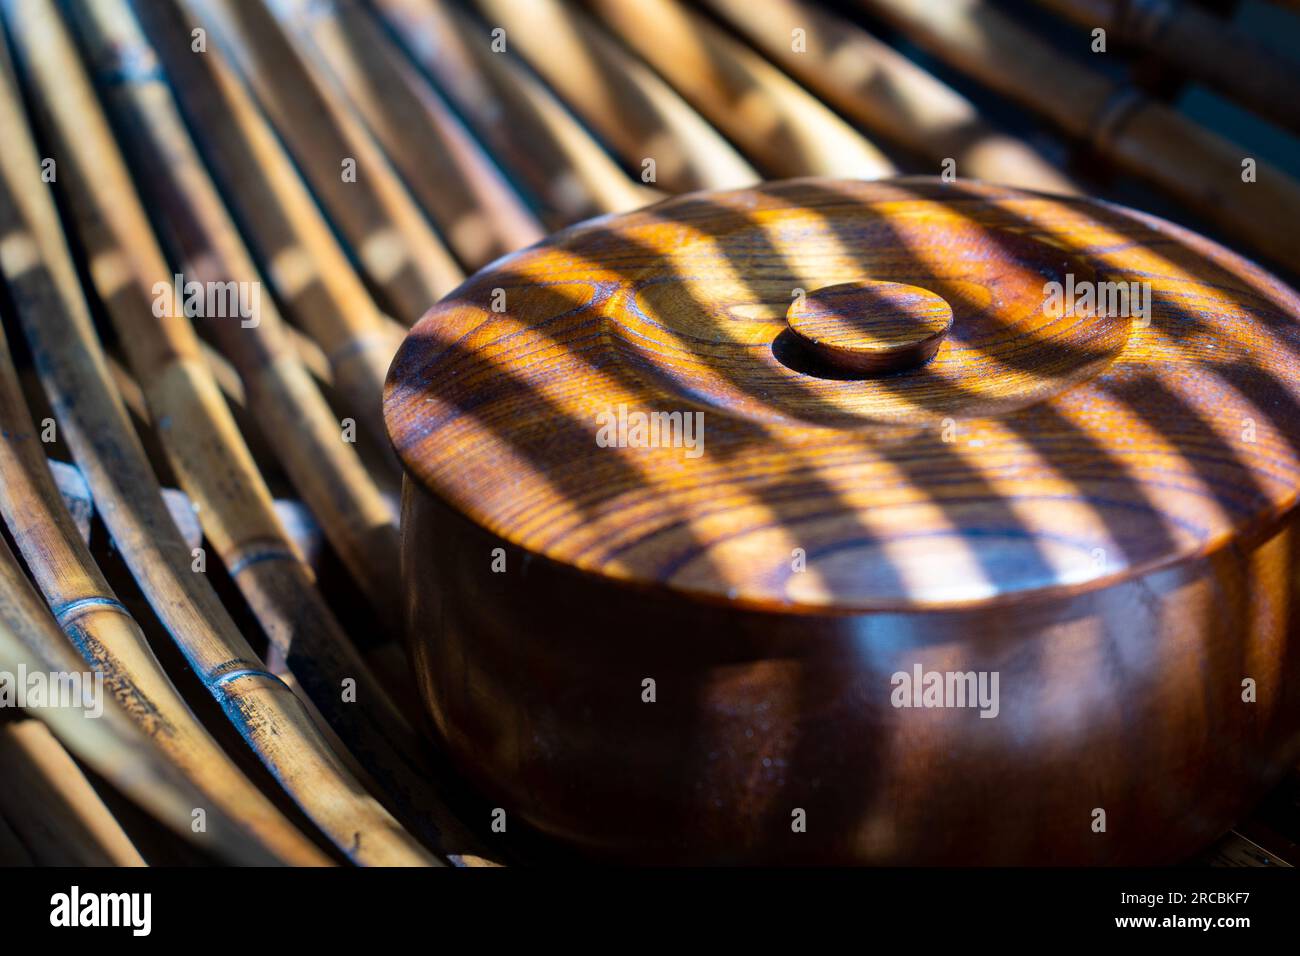 Brown round wood-patterned box in the light filtering through the blinds  Stock Photo - Alamy